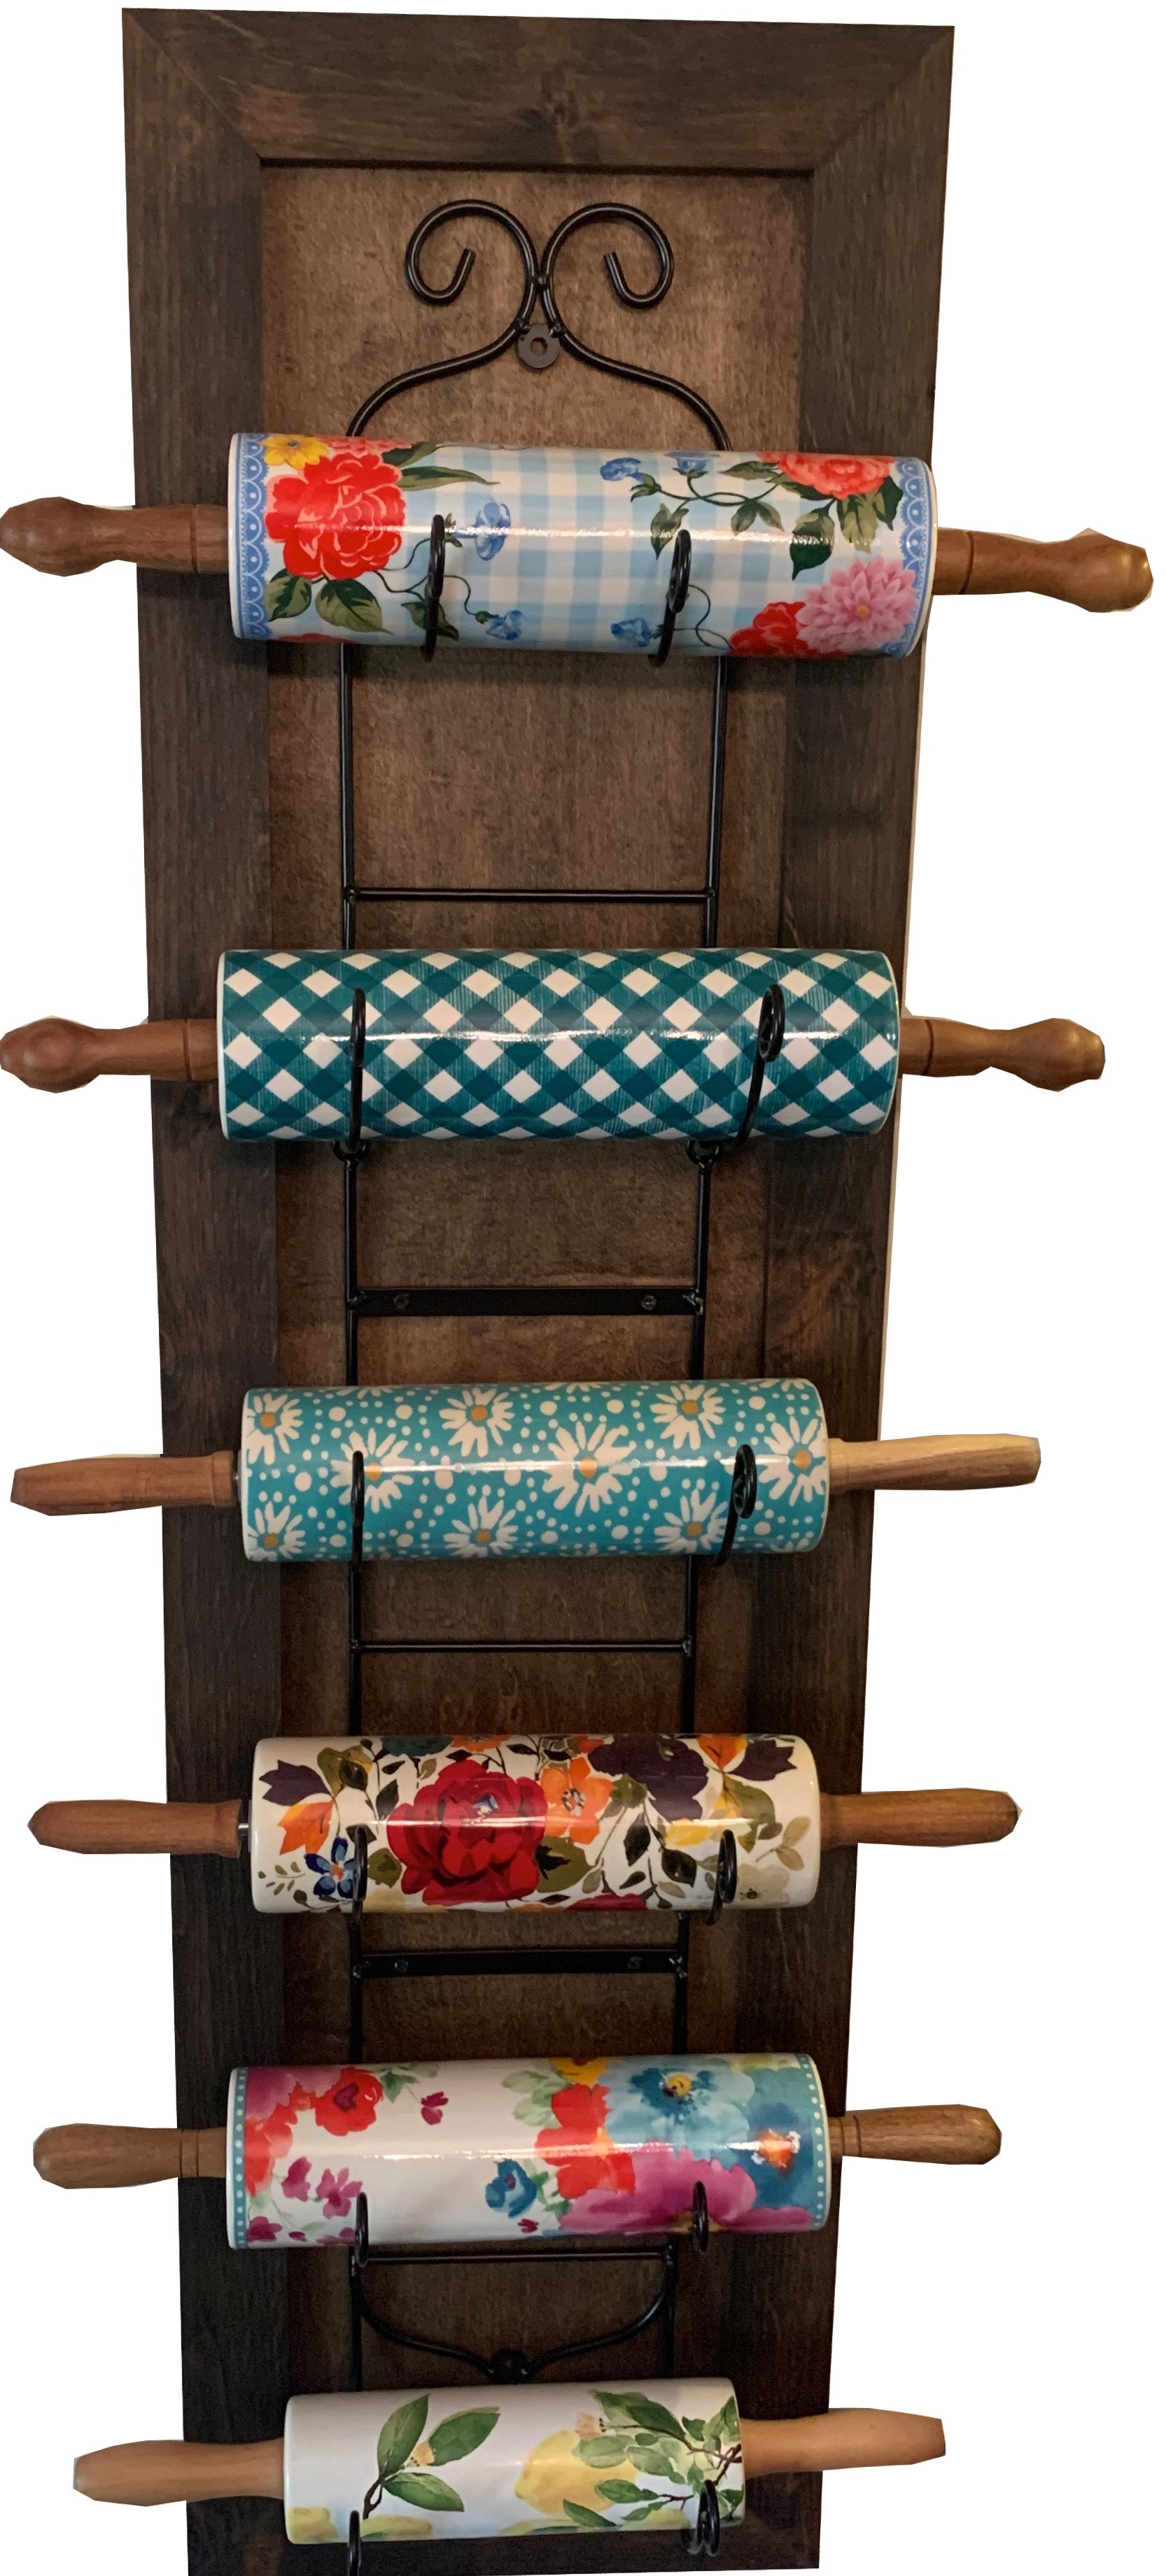 Rolling Pin Display Rack, Six Colors Available for Rolling Pin